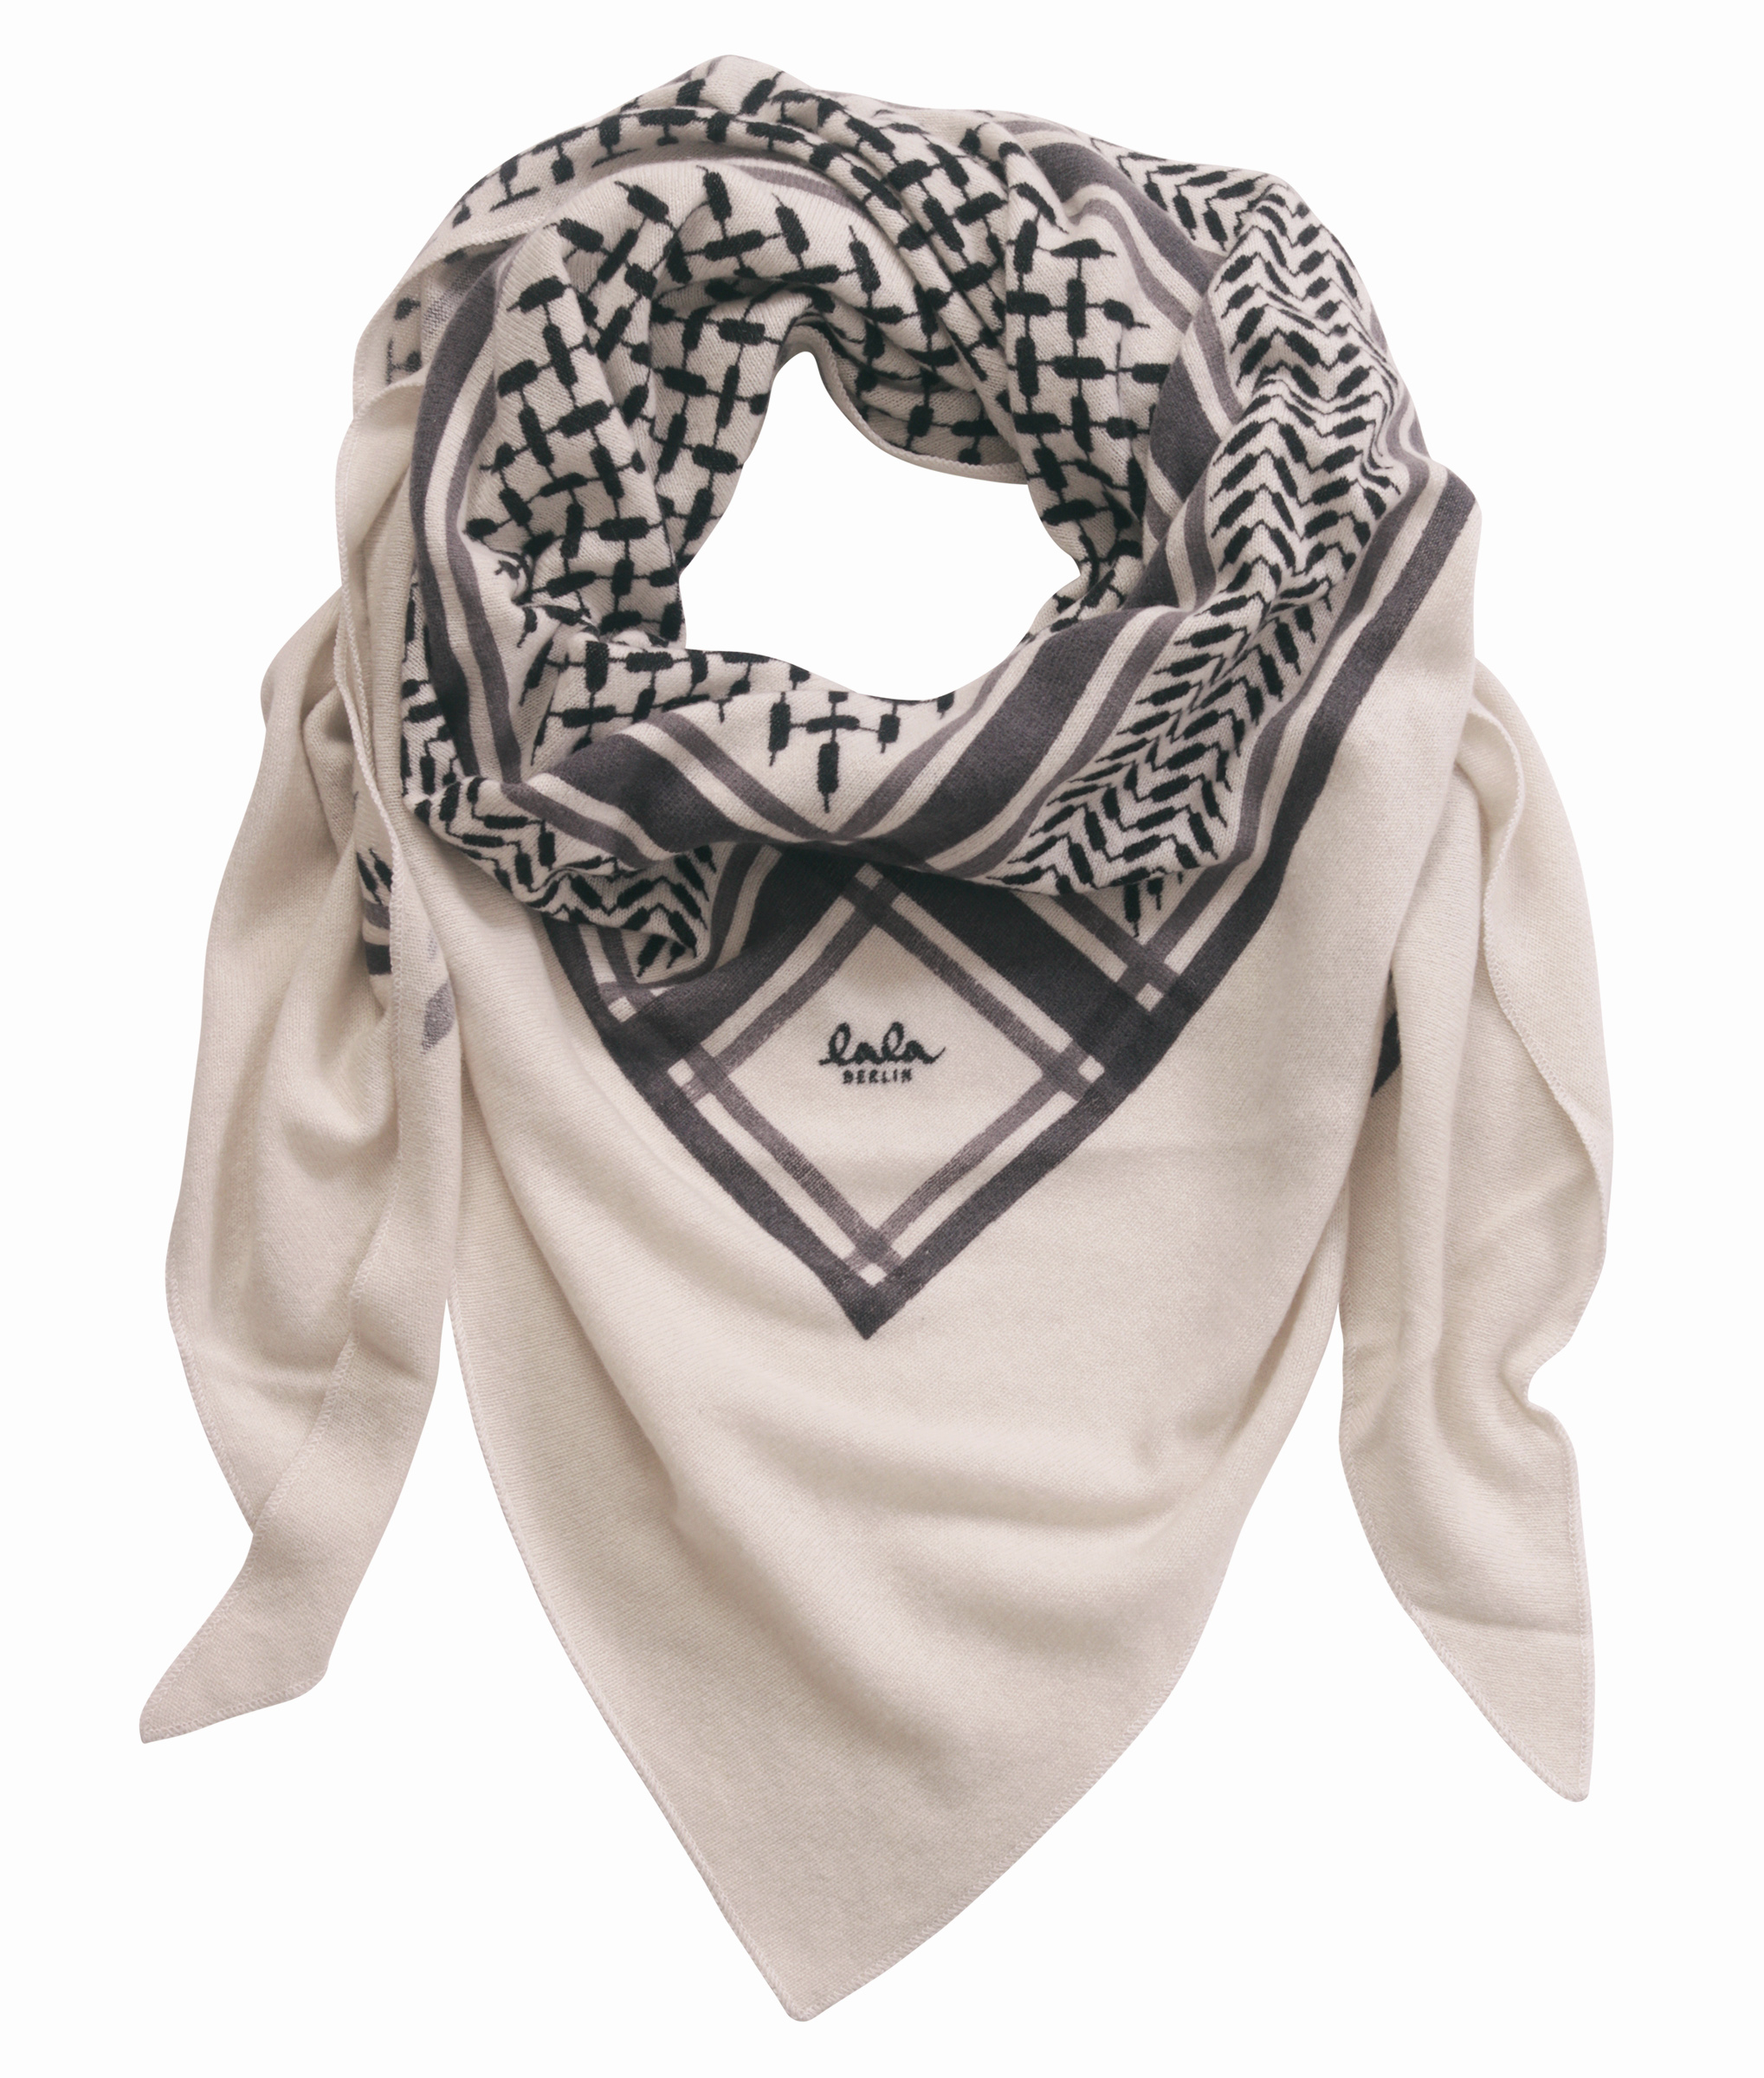 LALA BERLIN Cashmere Scarf Large Triangle Offwhite